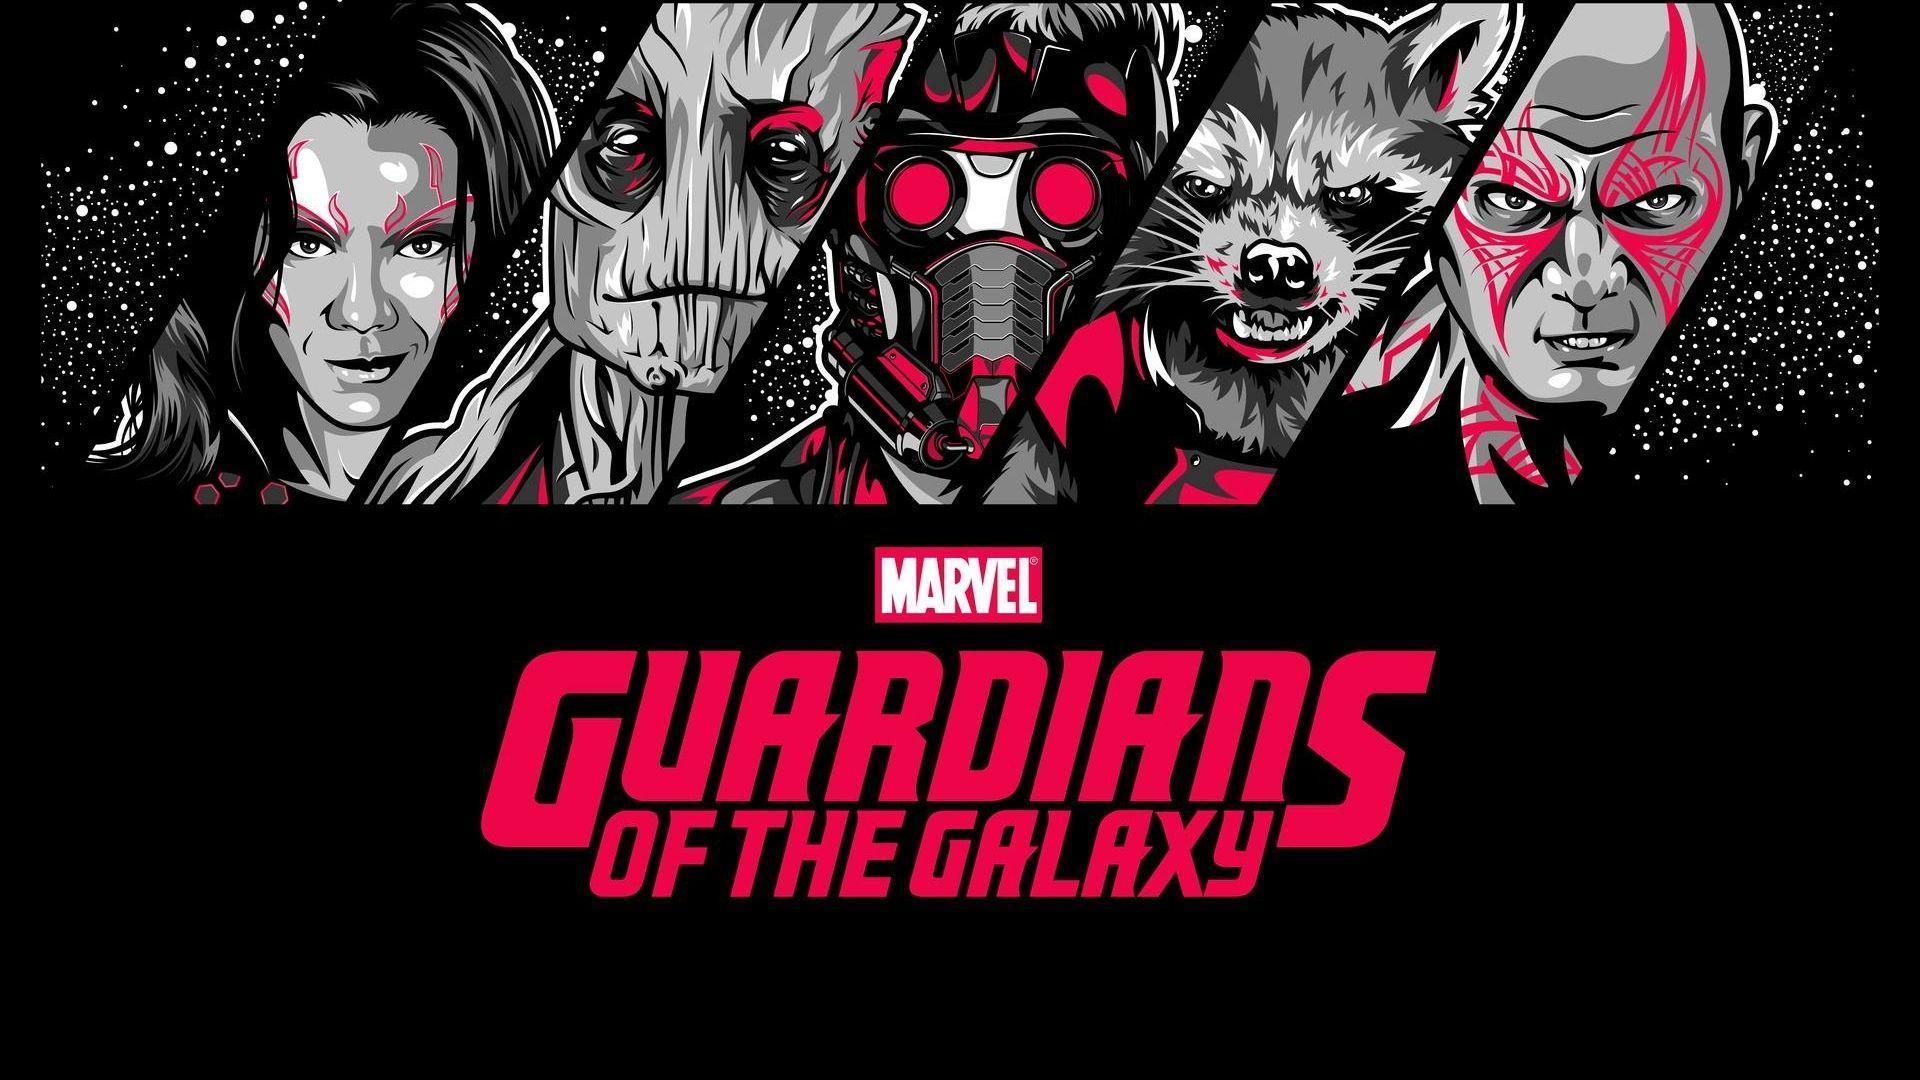 Guardians Of The Galaxy HD Wallpaper. Background